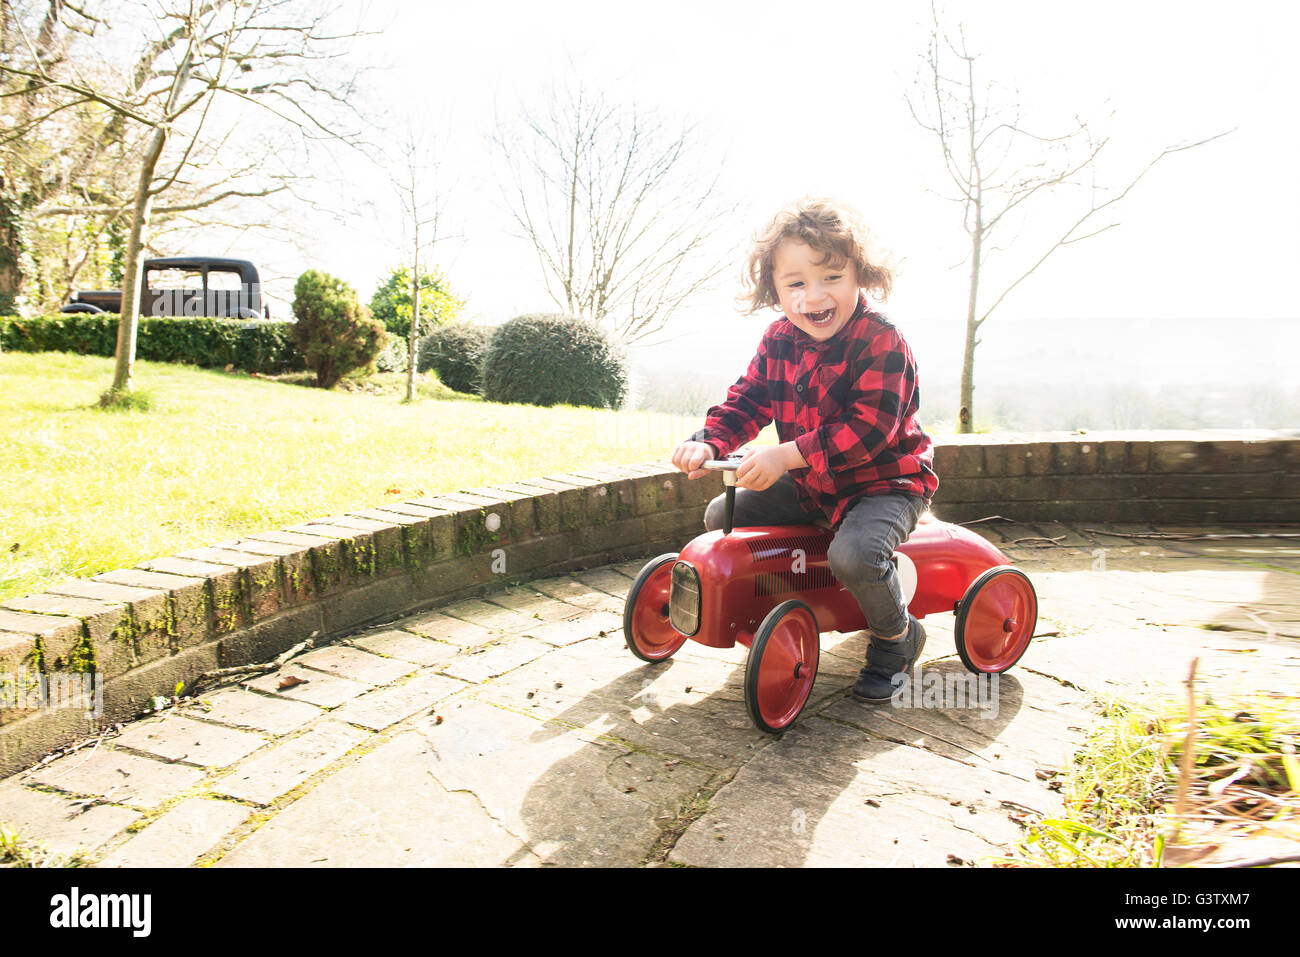 A four year old boy riding a toy tractor around the garden in a check shirt. Stock Photo